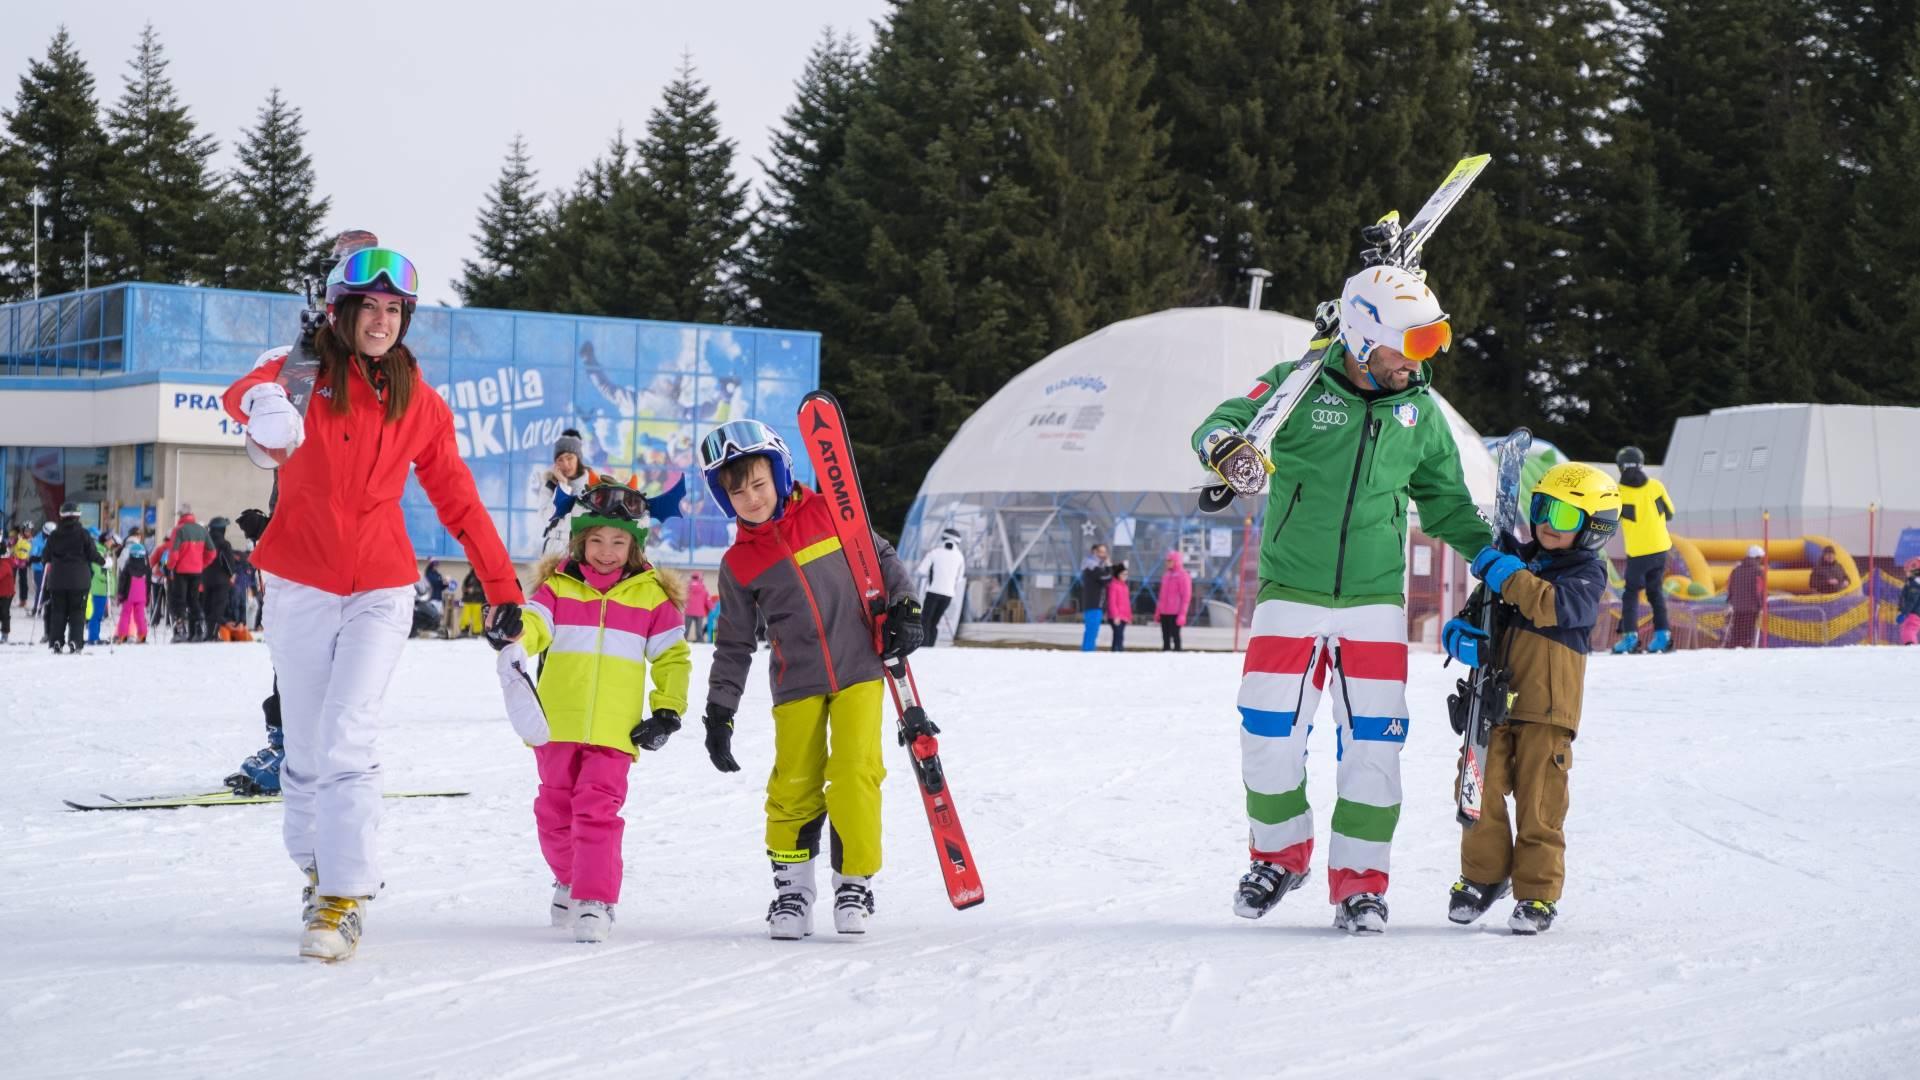 March Skiing Holiday: Skipass included and the Easter skiing offer